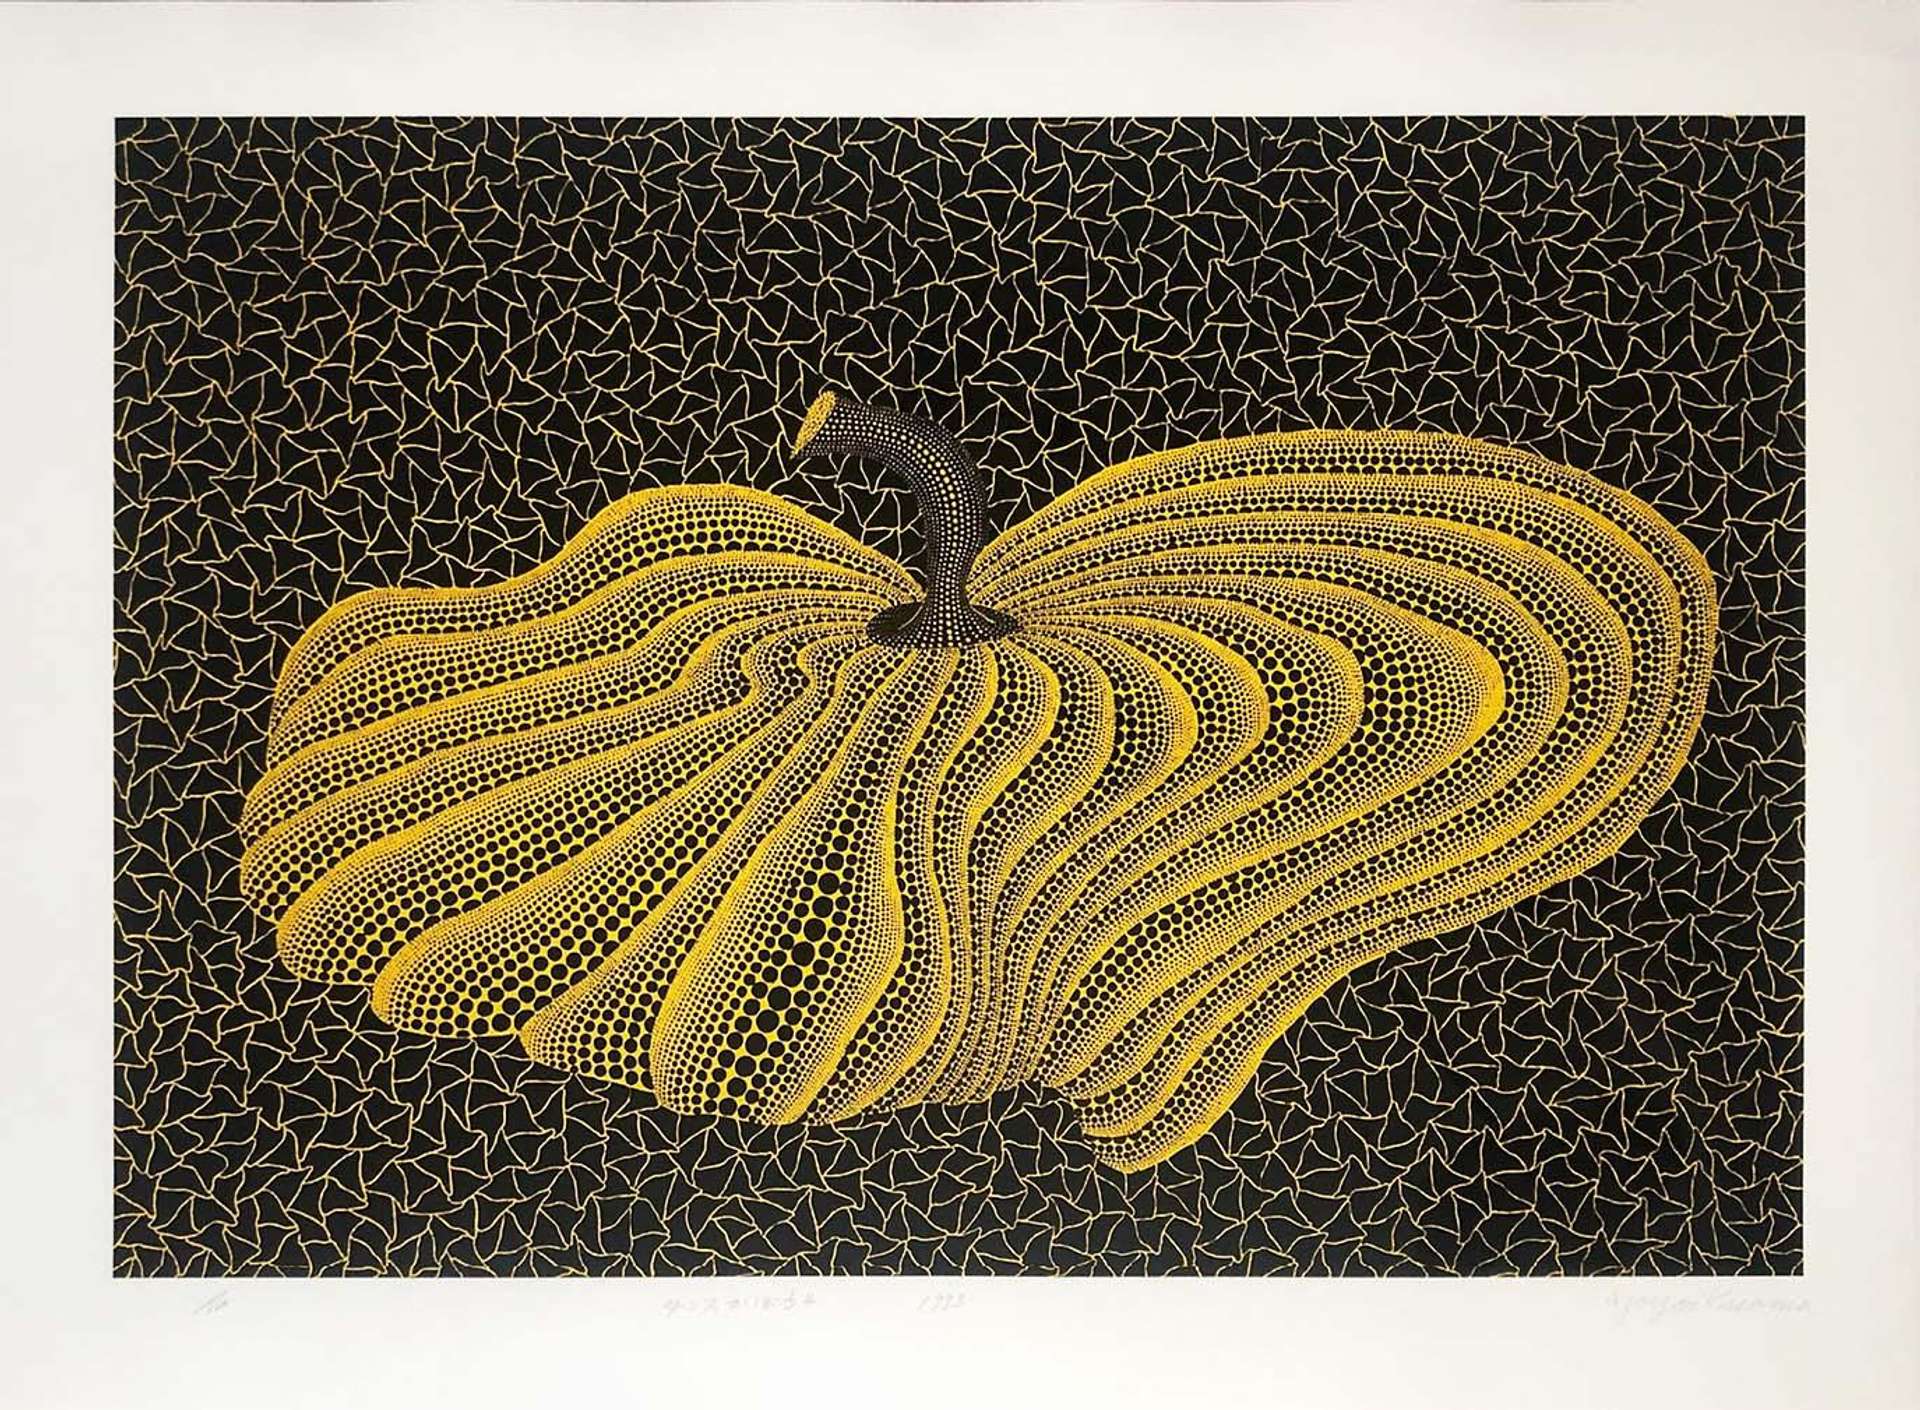 A screenprint by Yayoi Kusama depicting a yellow warped pumpkin against a black and yellow patterned background